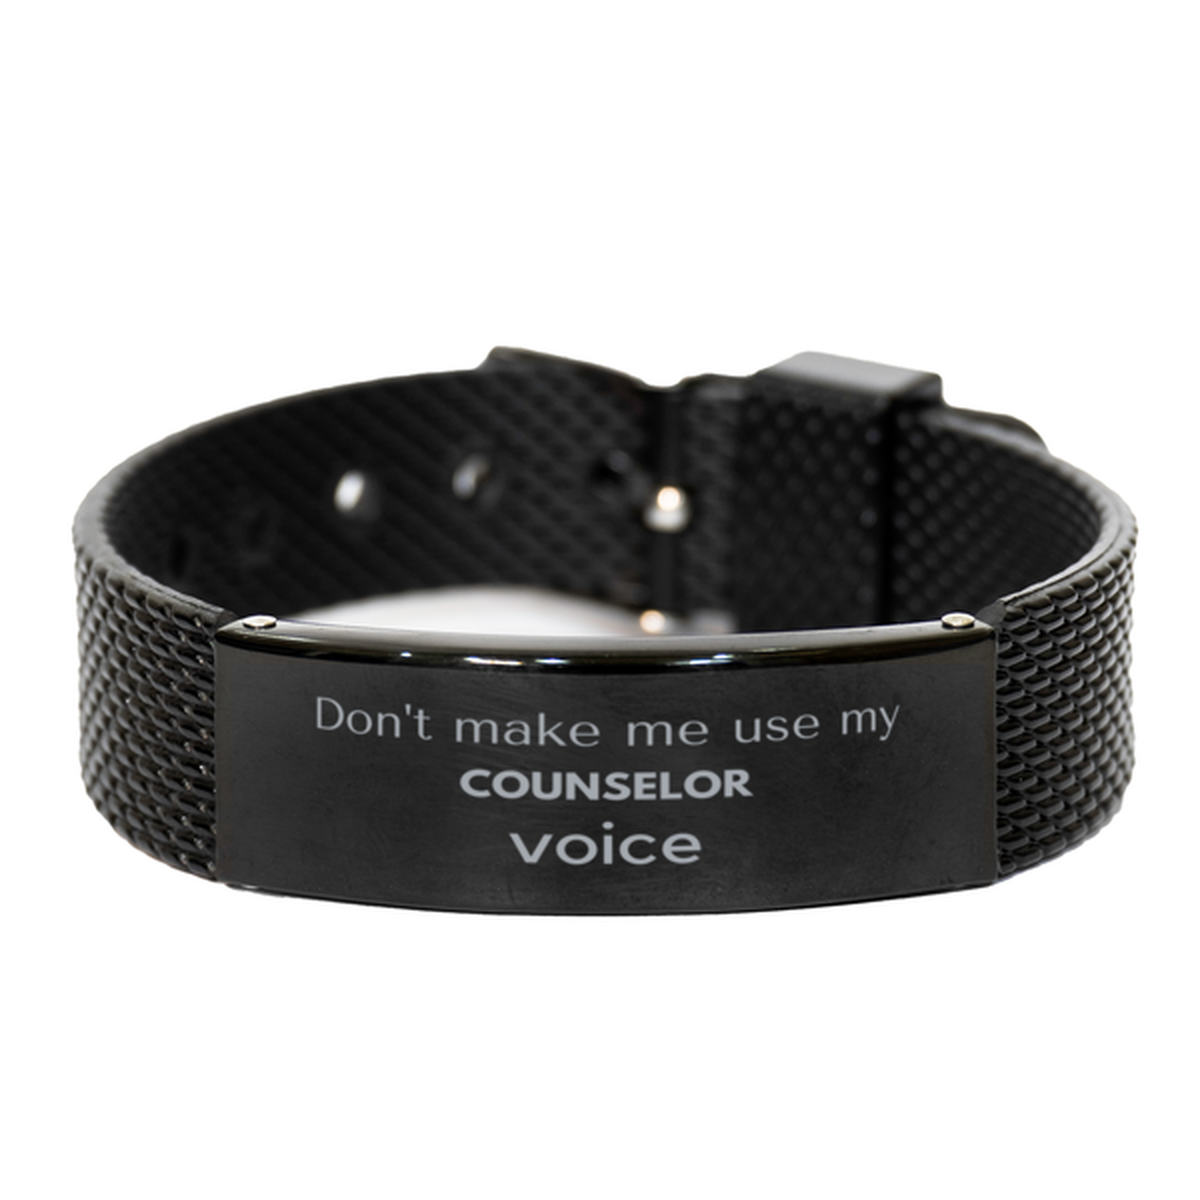 Don't make me use my Counselor voice, Sarcasm Counselor Gifts, Christmas Counselor Black Shark Mesh Bracelet Birthday Unique Gifts For Counselor Coworkers, Men, Women, Colleague, Friends